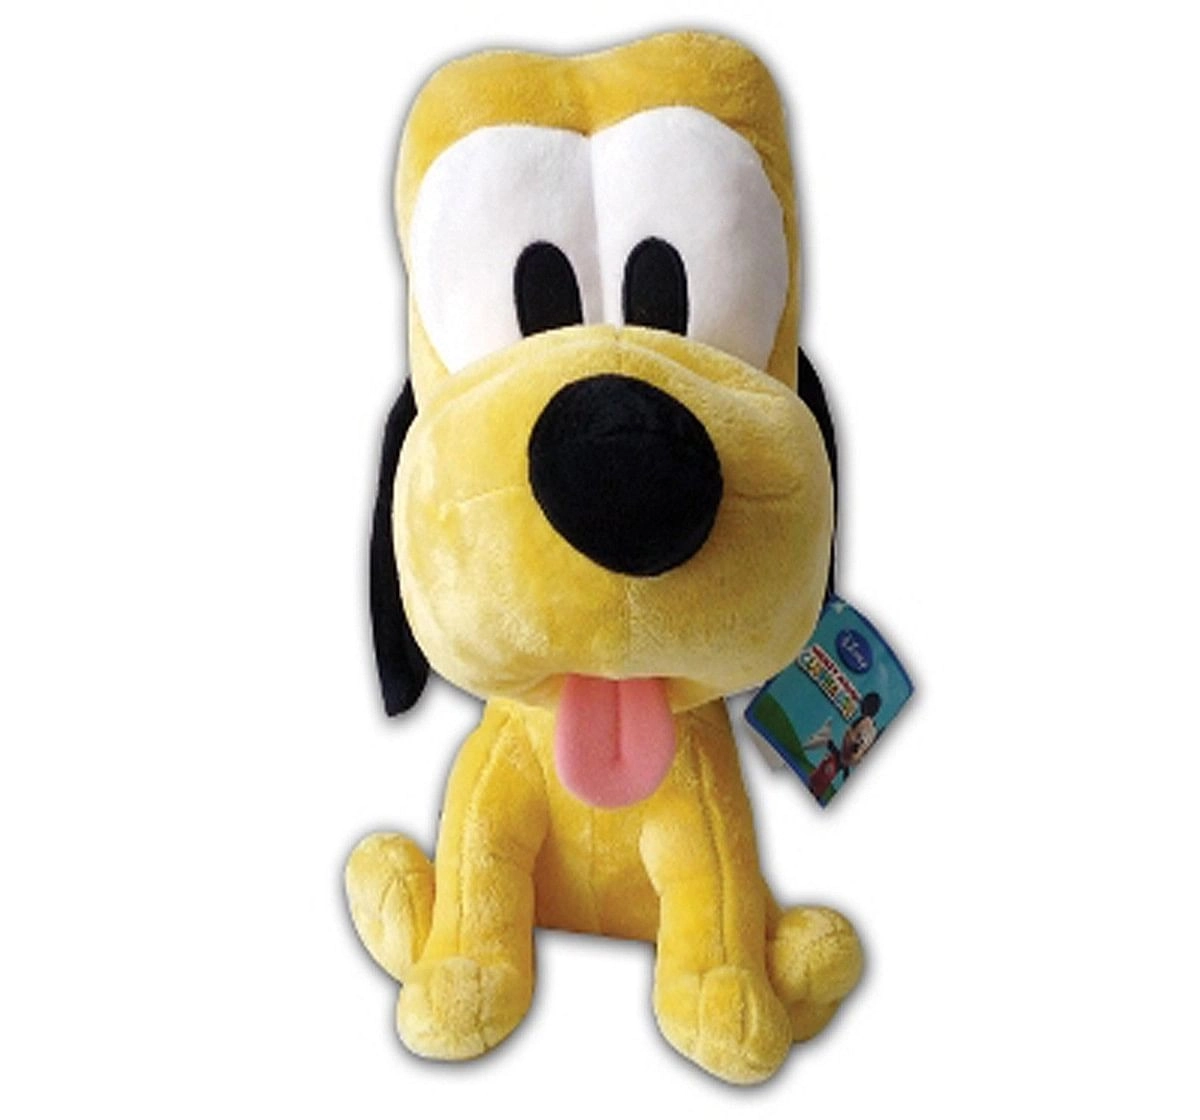 Disney Pluto Big Head 10" Character Soft Toy for Kids age 1Y+ (Yellow)